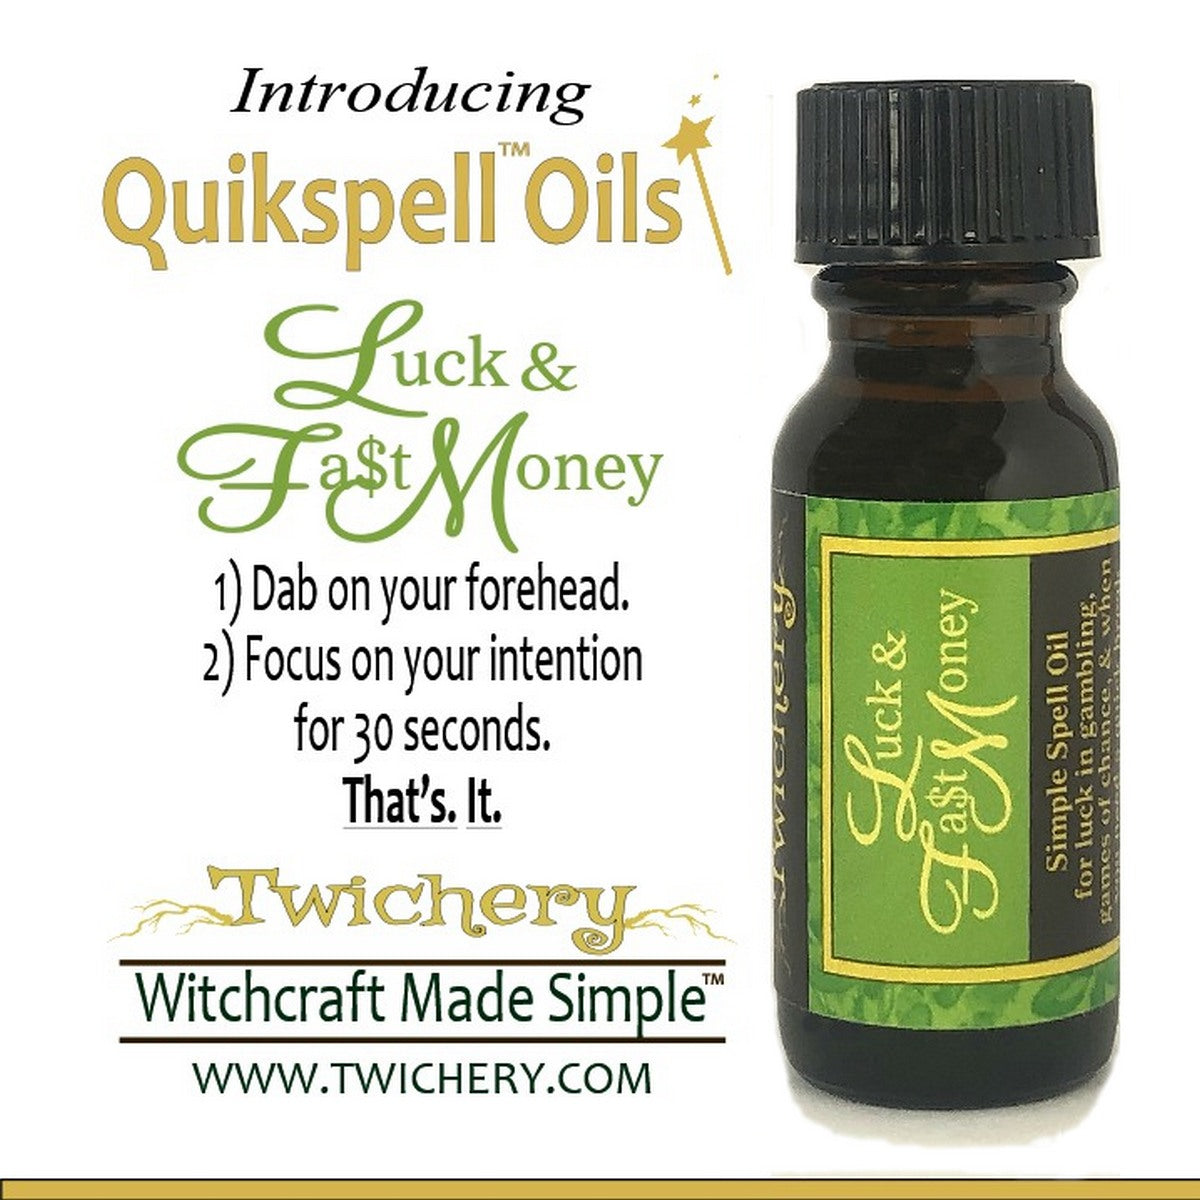 Twichery Luck & Fast Money Quikspell Oil is your superquick all-purpose mojo booster, hoodoo, voodoo, wicca, pagan, Witchcraft Made Simple